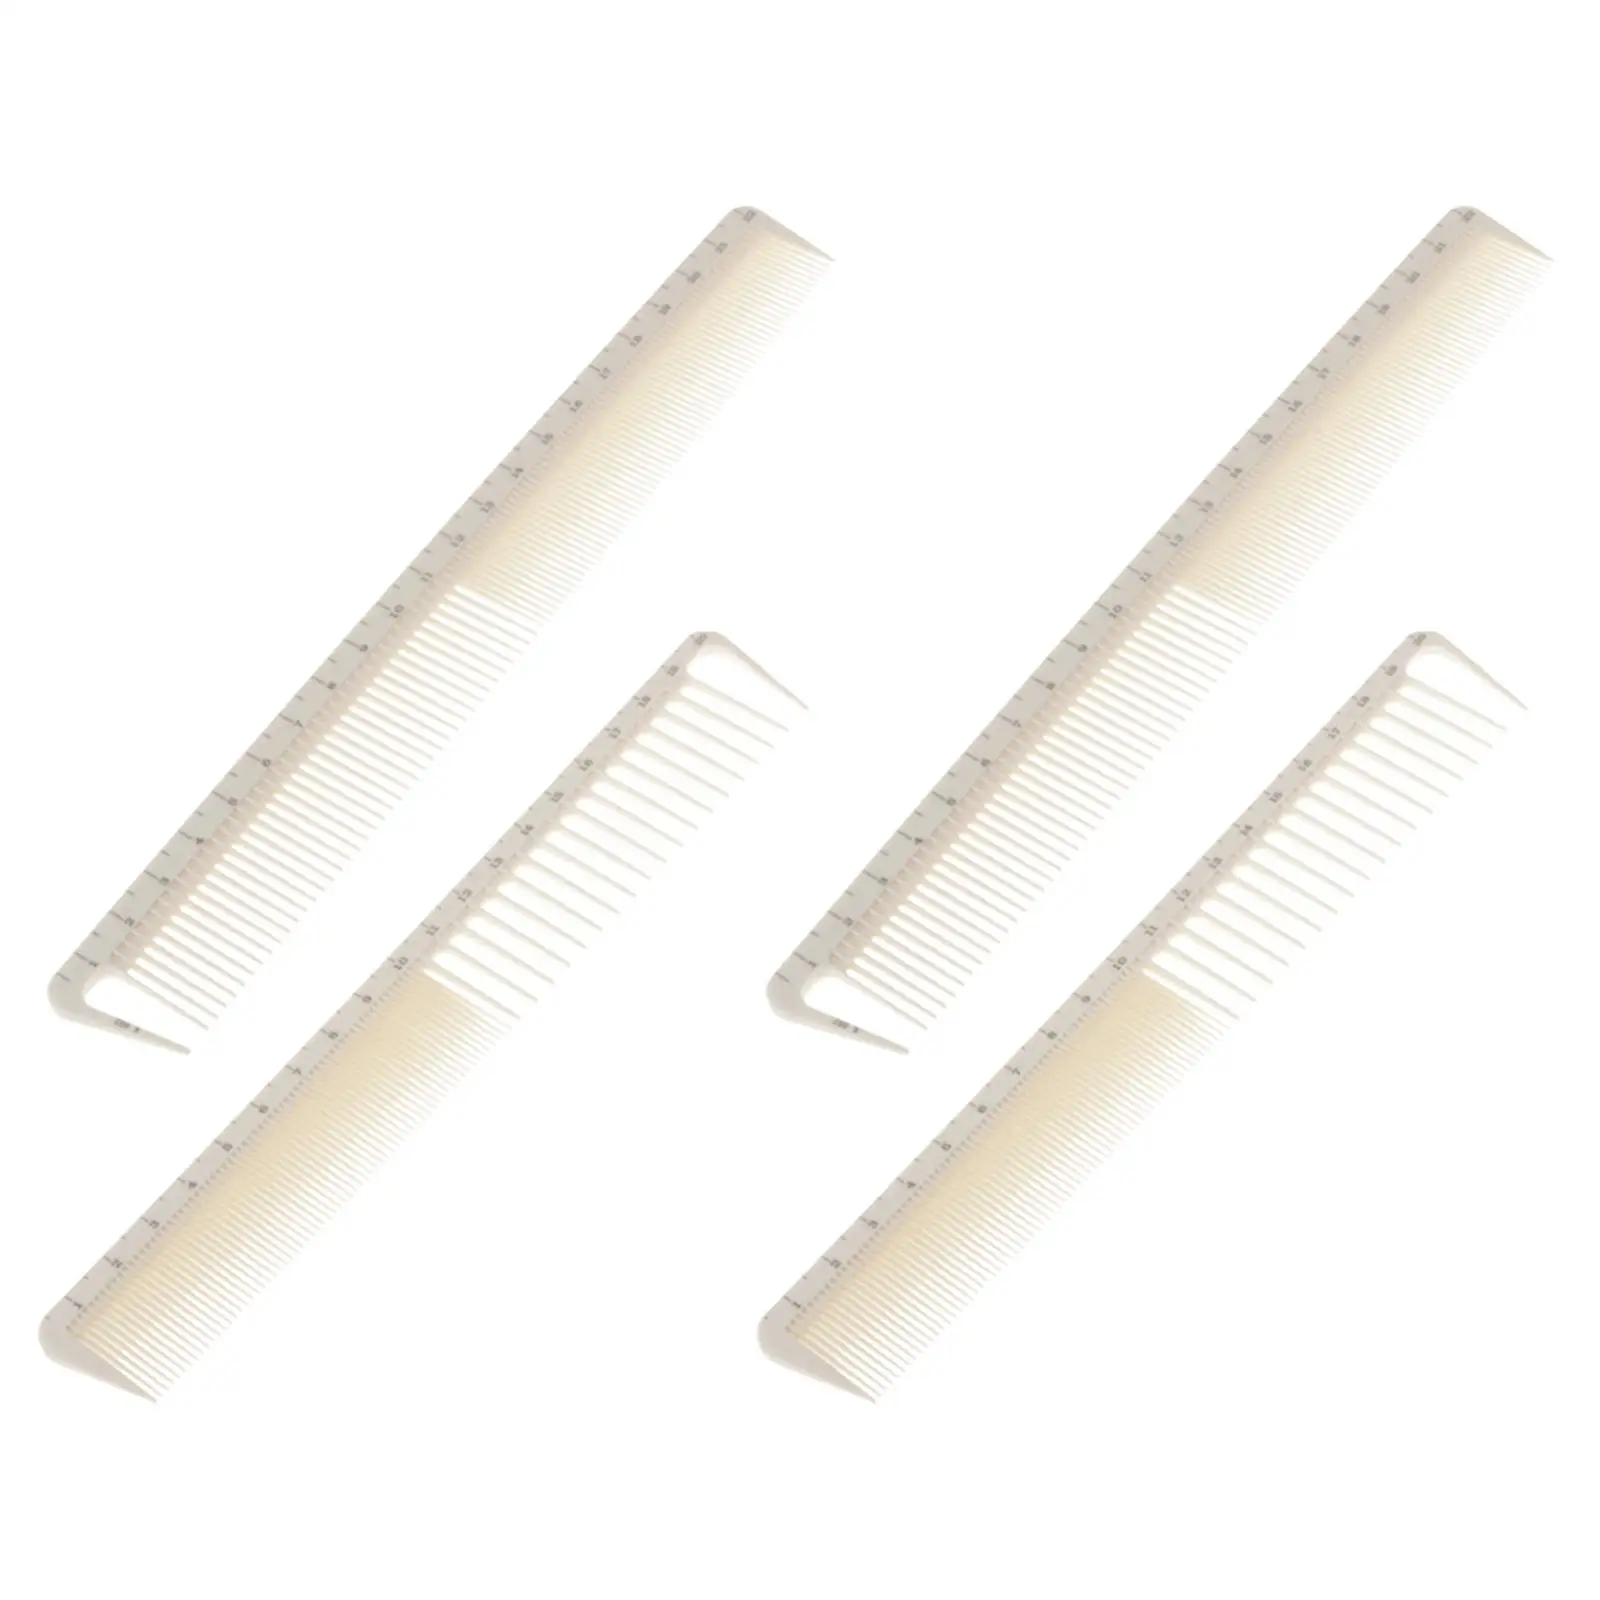 4x Professional Salon Barber Hairdressing Resin Comb Hair Comb